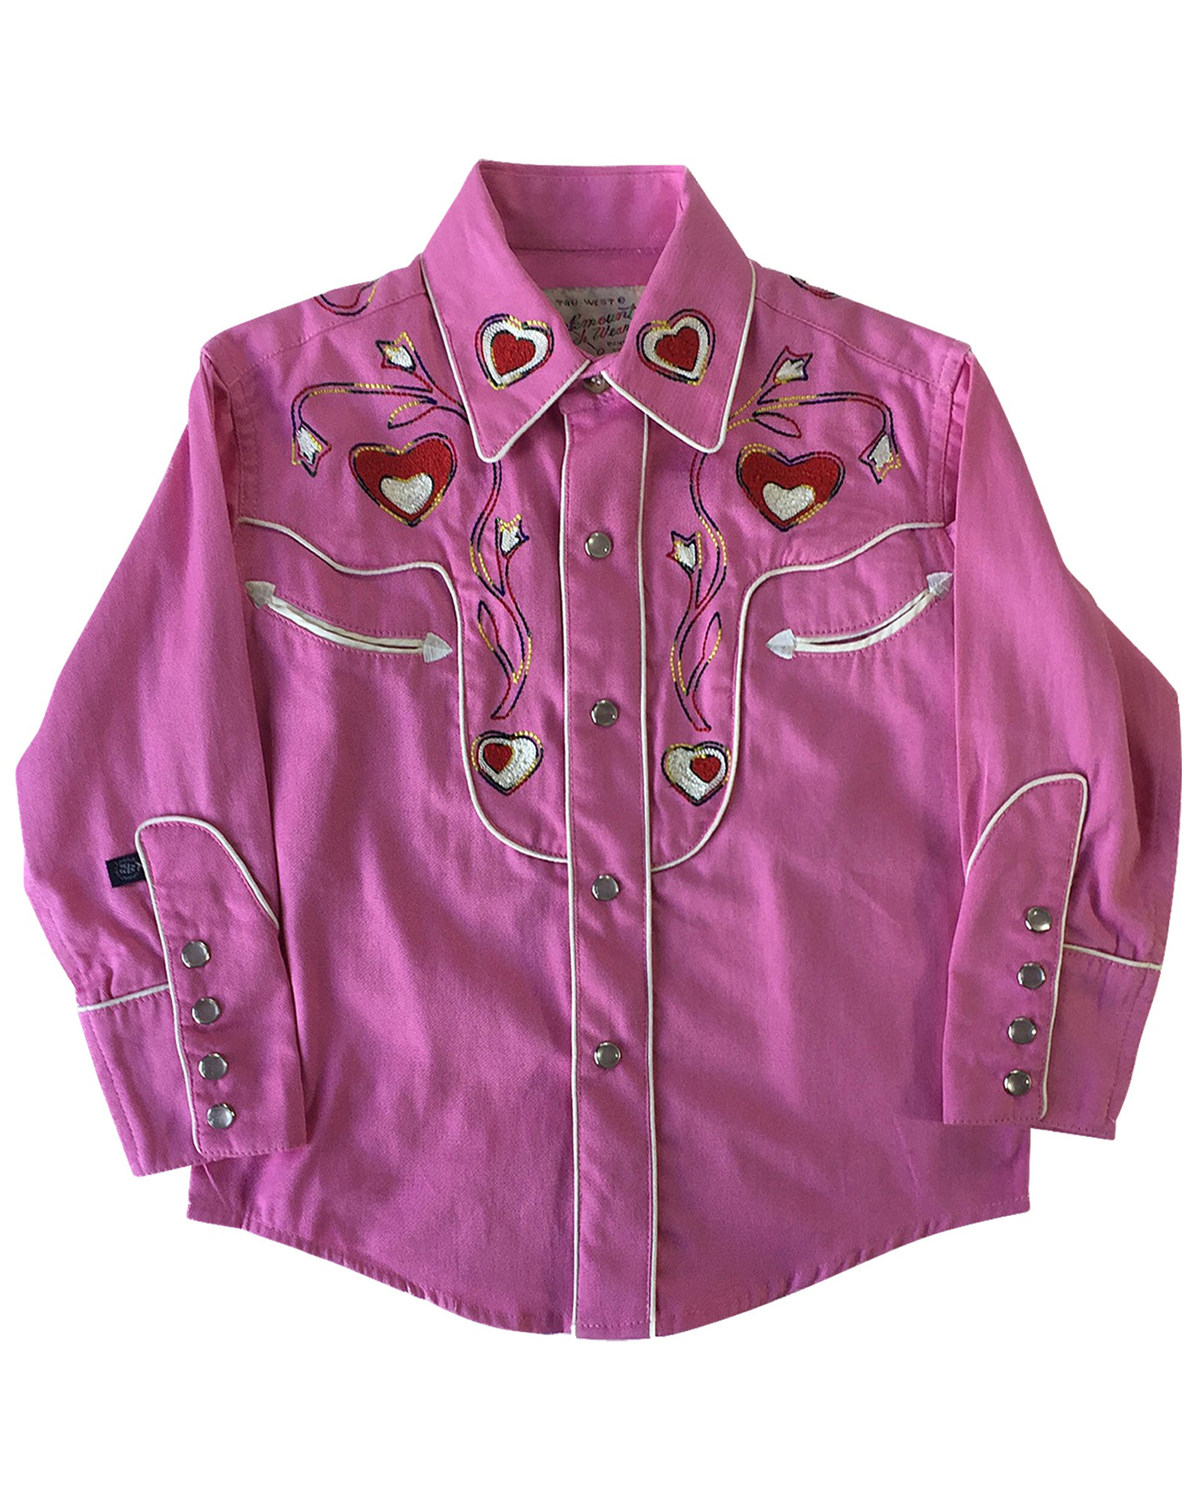 Rockmount Ranchwear Girls' Embroidered Hearts & Floral Western Shirt